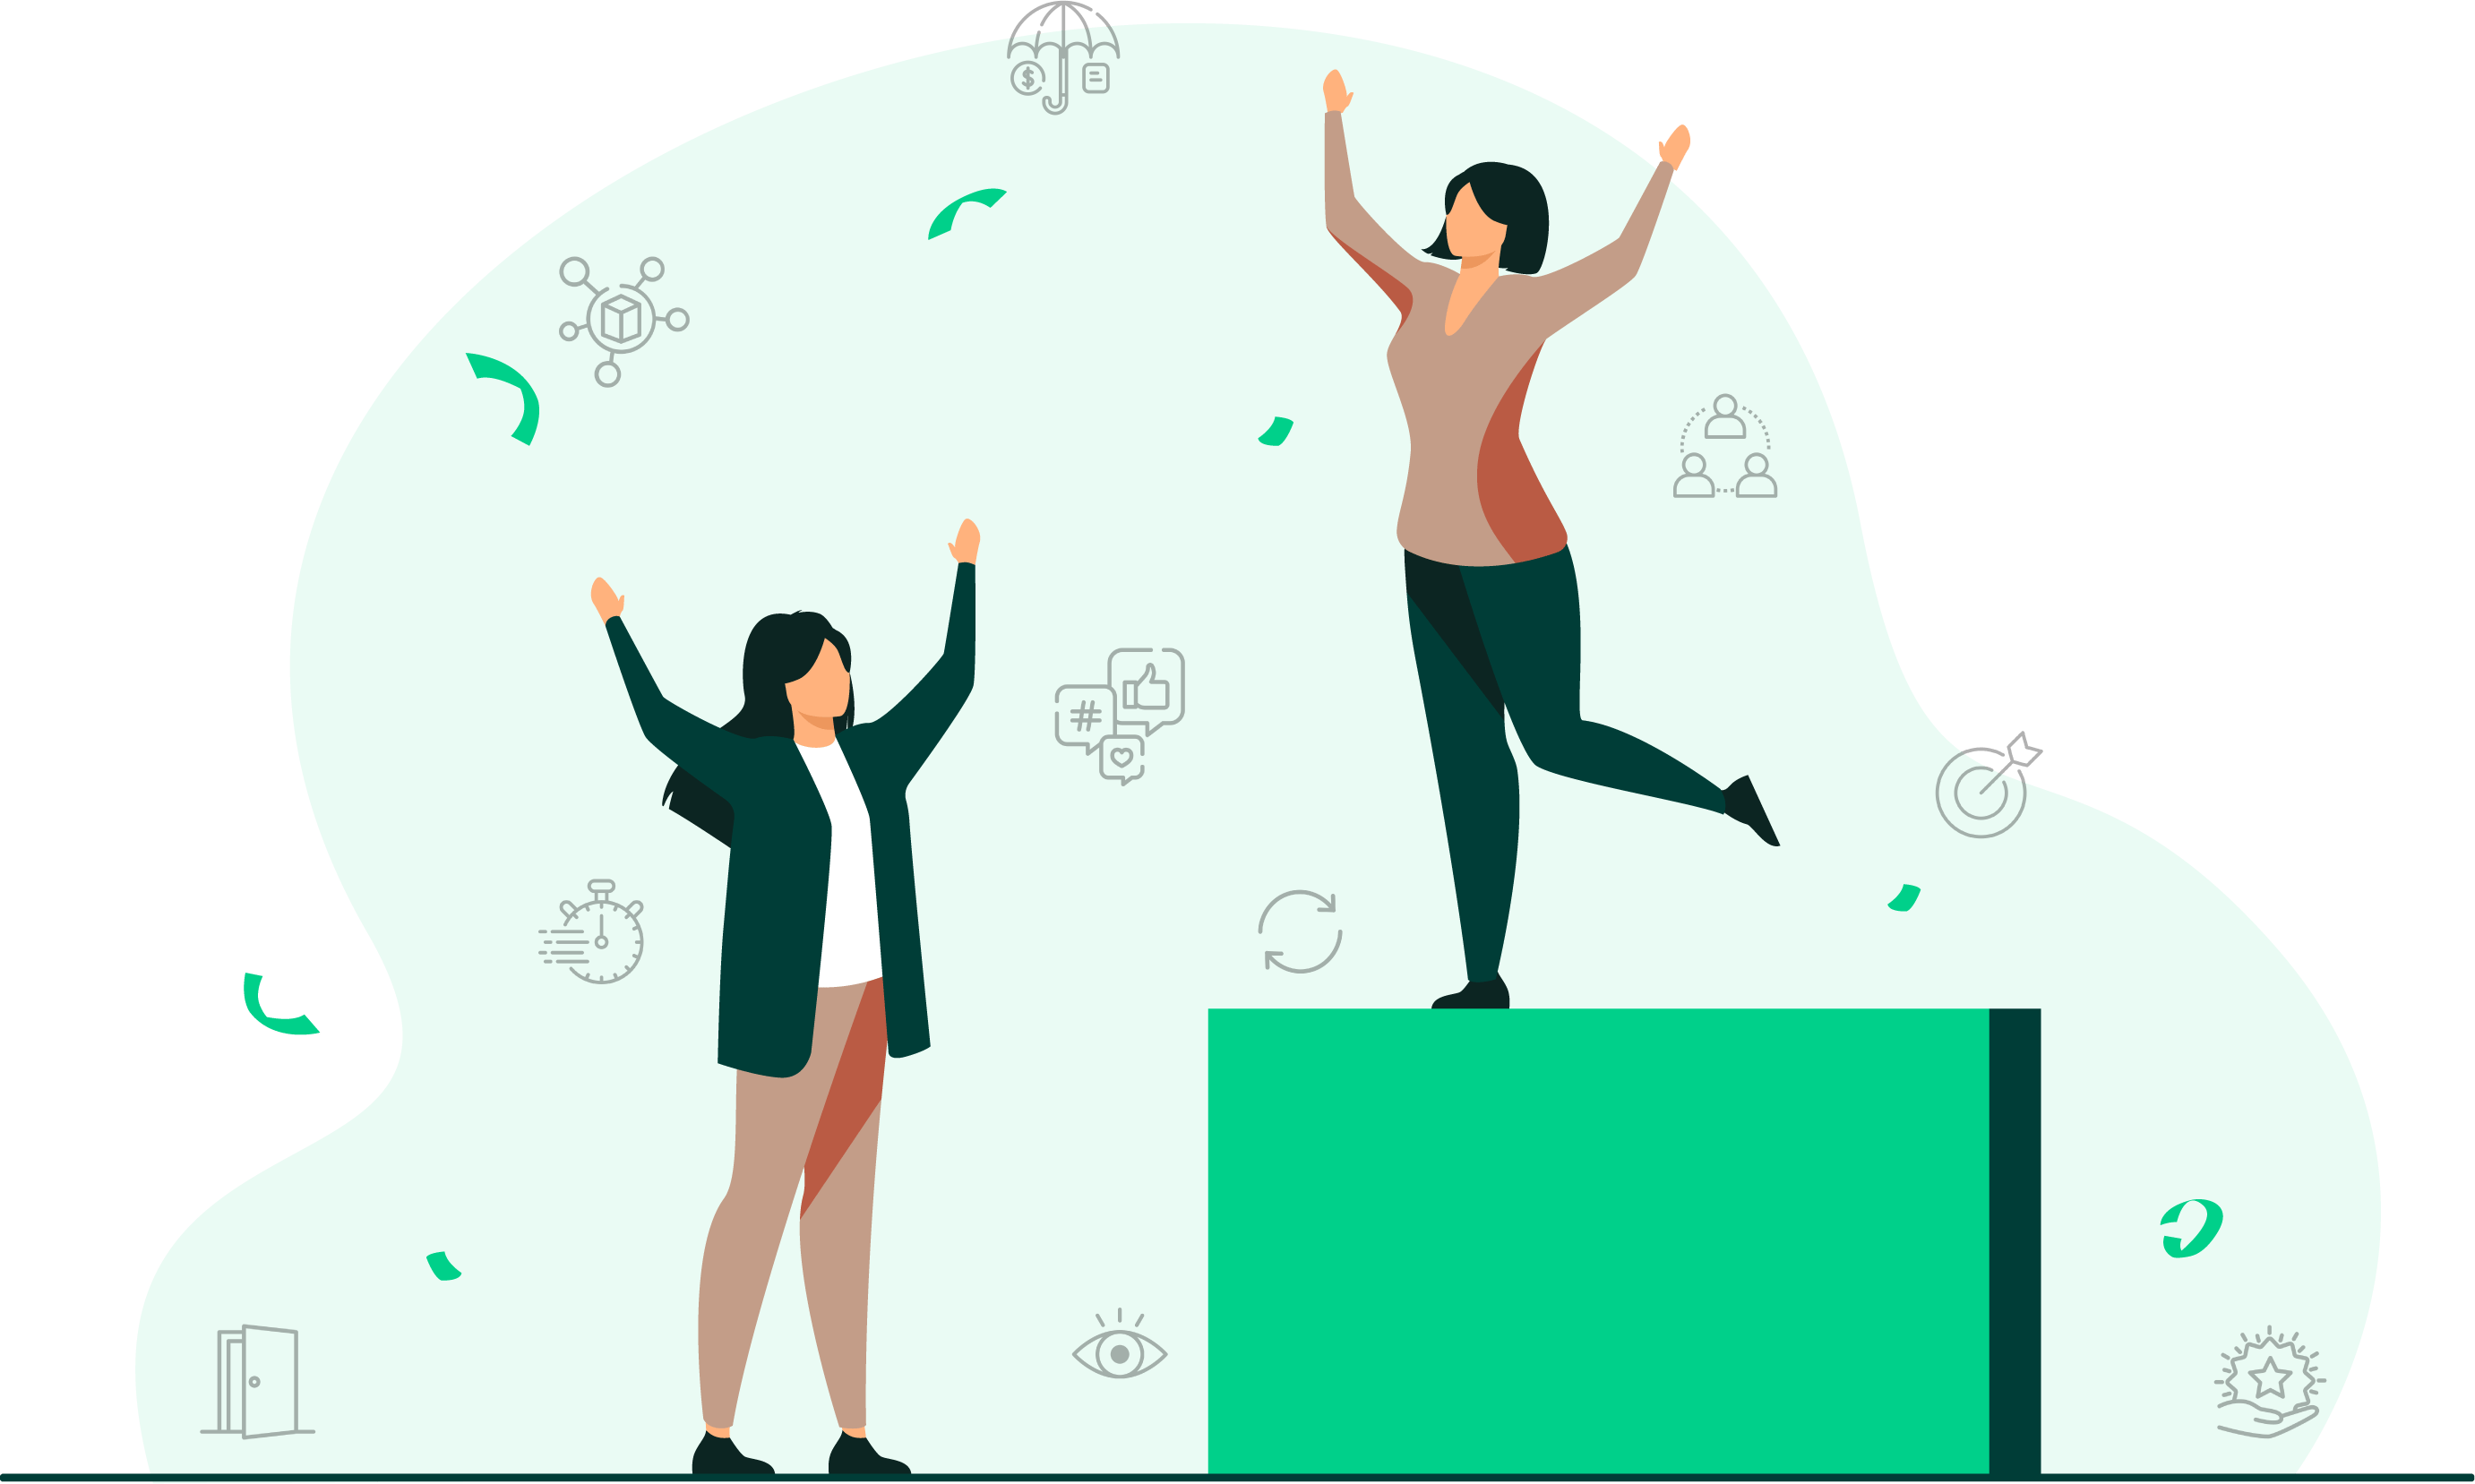 Healthcare hiring strategies. Two illustration figures extend their arms in celebration.